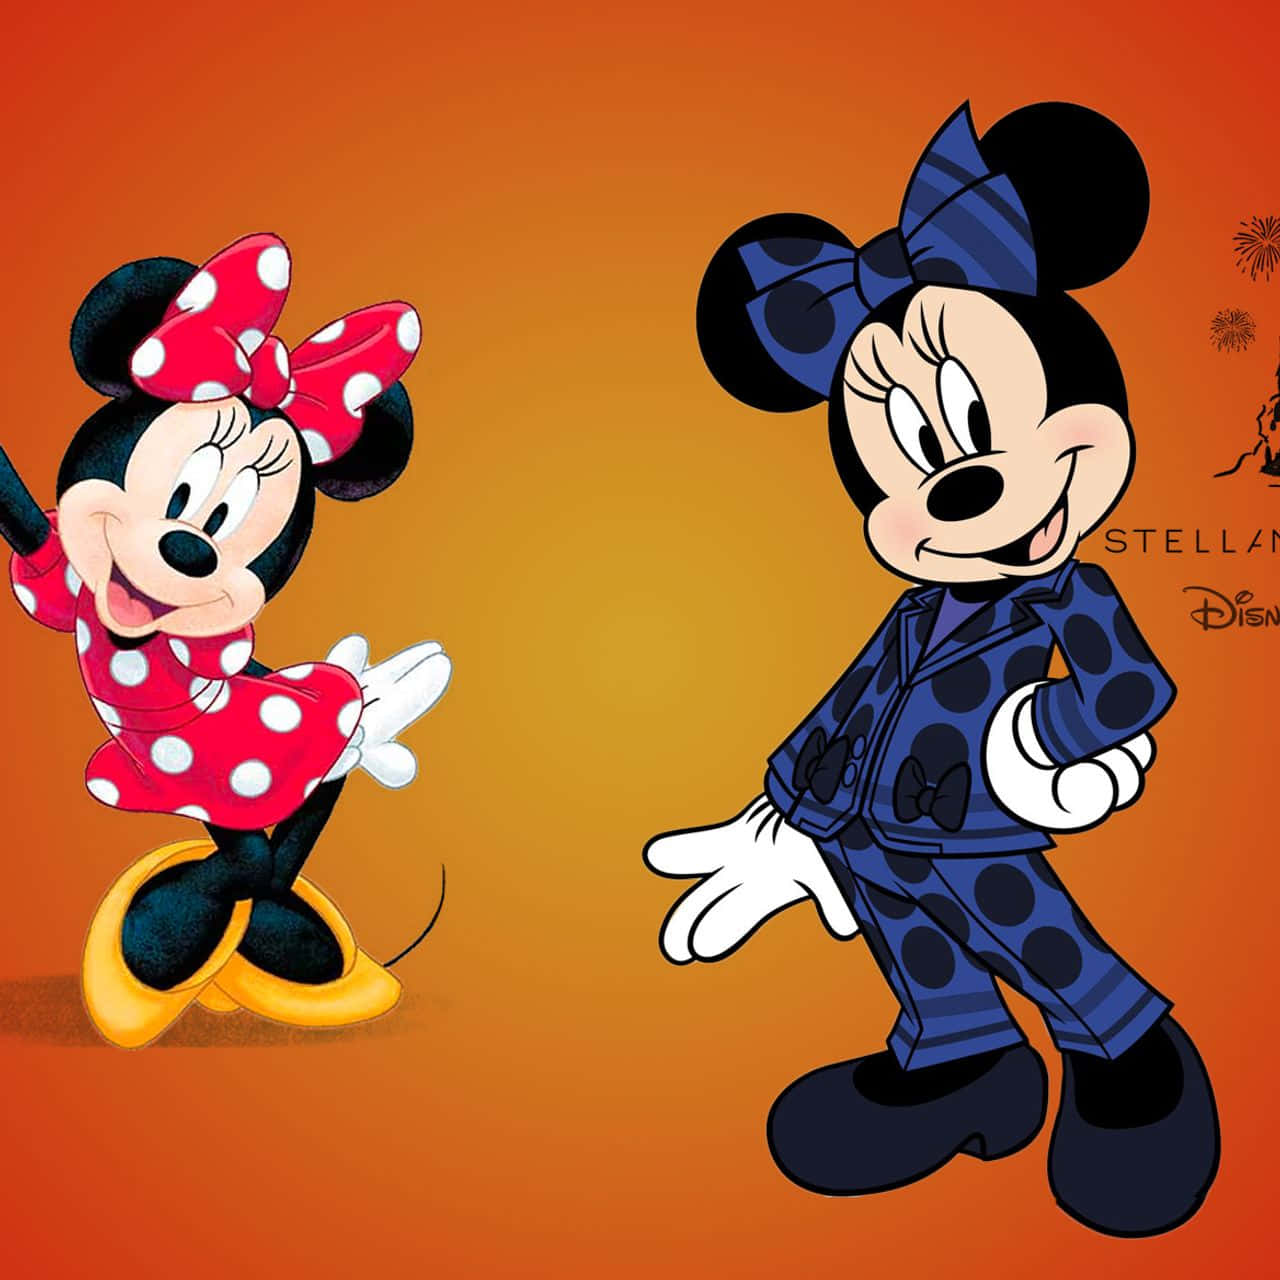 Enjoying Fun and Laughter - Minnie Mouse